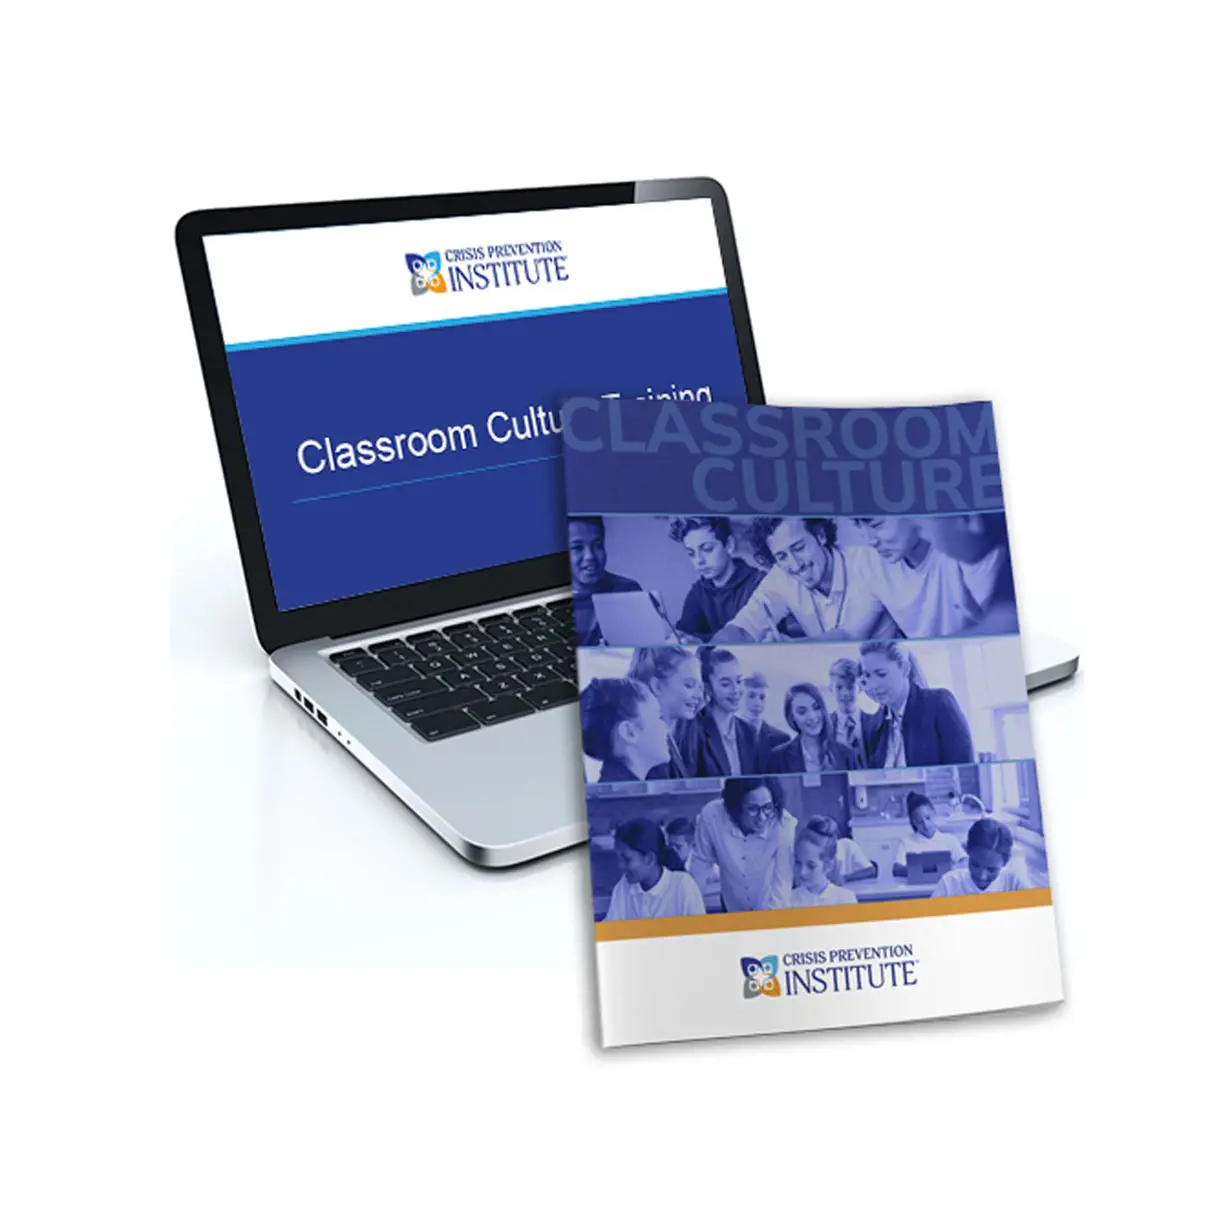 Laptop showing Classroom Culture on screen and workbook